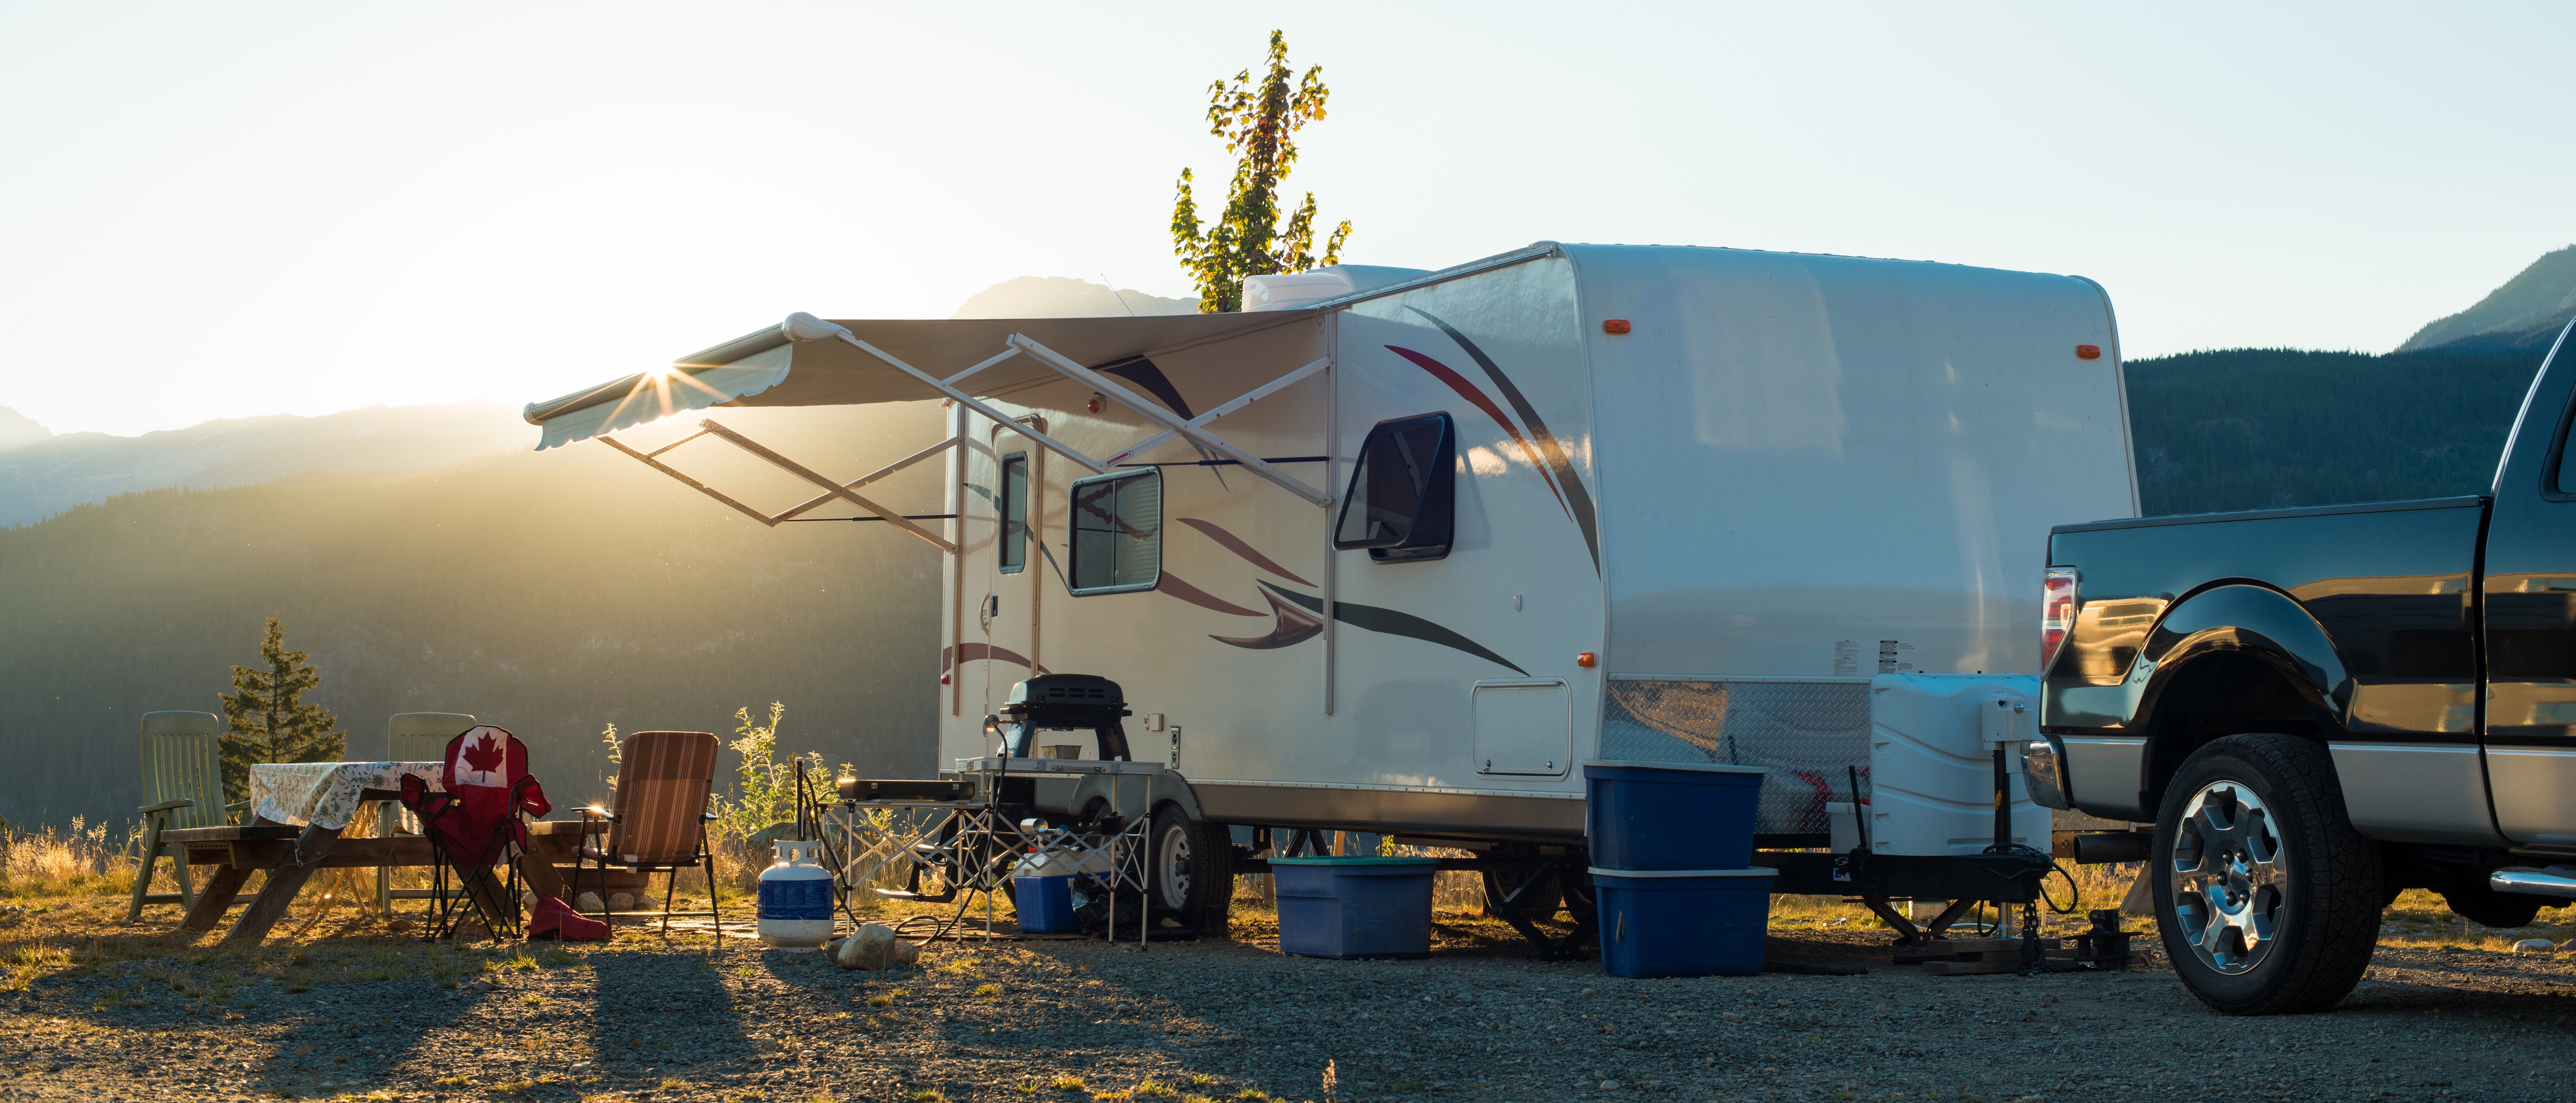 Learn How To Clean and Maintain RV Awnings